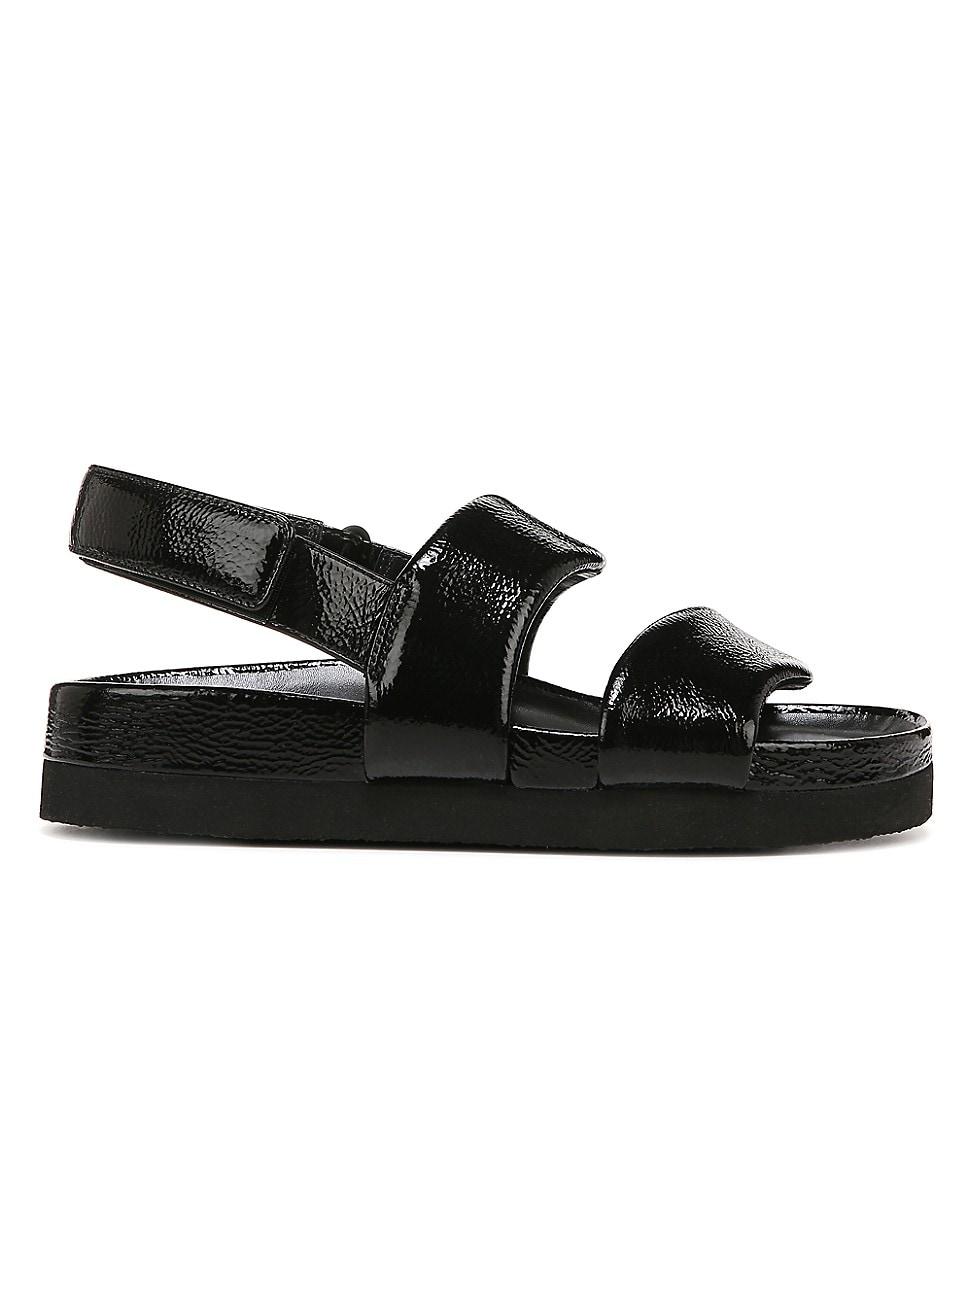 Vince Gemini Leather Sandals in Black | Lyst